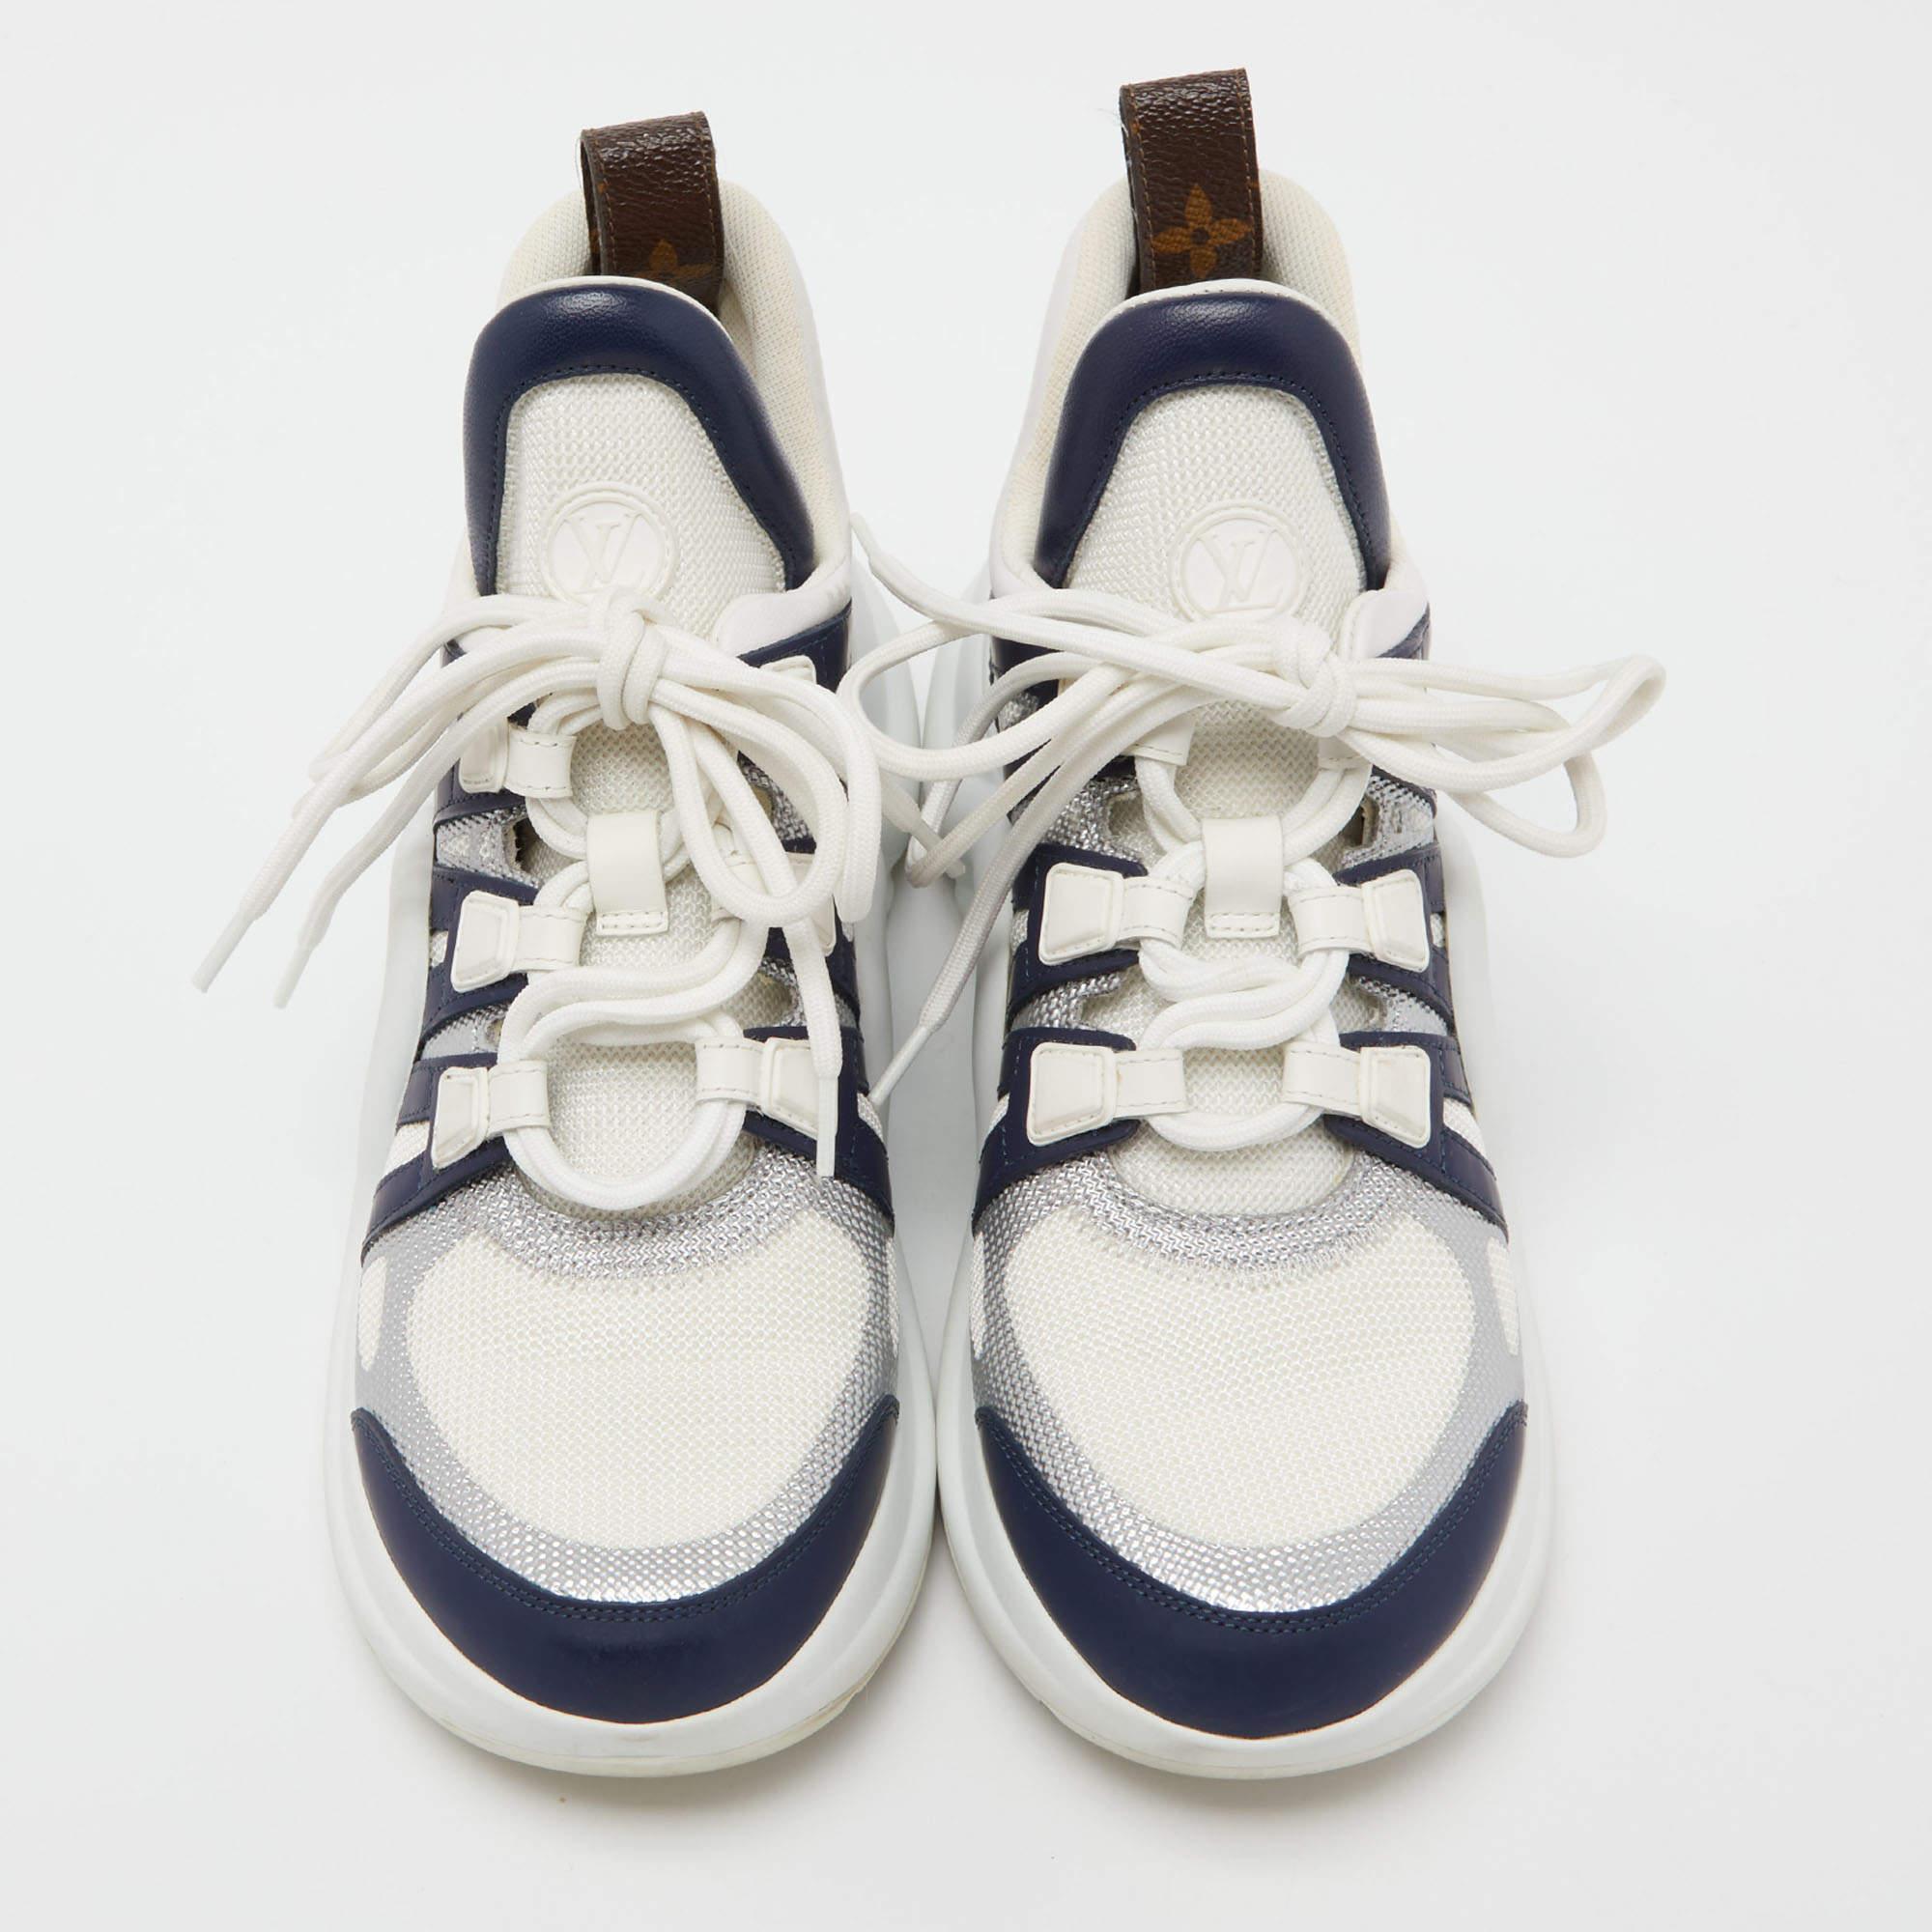 Gray Louis Vuitton Tricolor Leather and Mesh Archlight Sneakers 